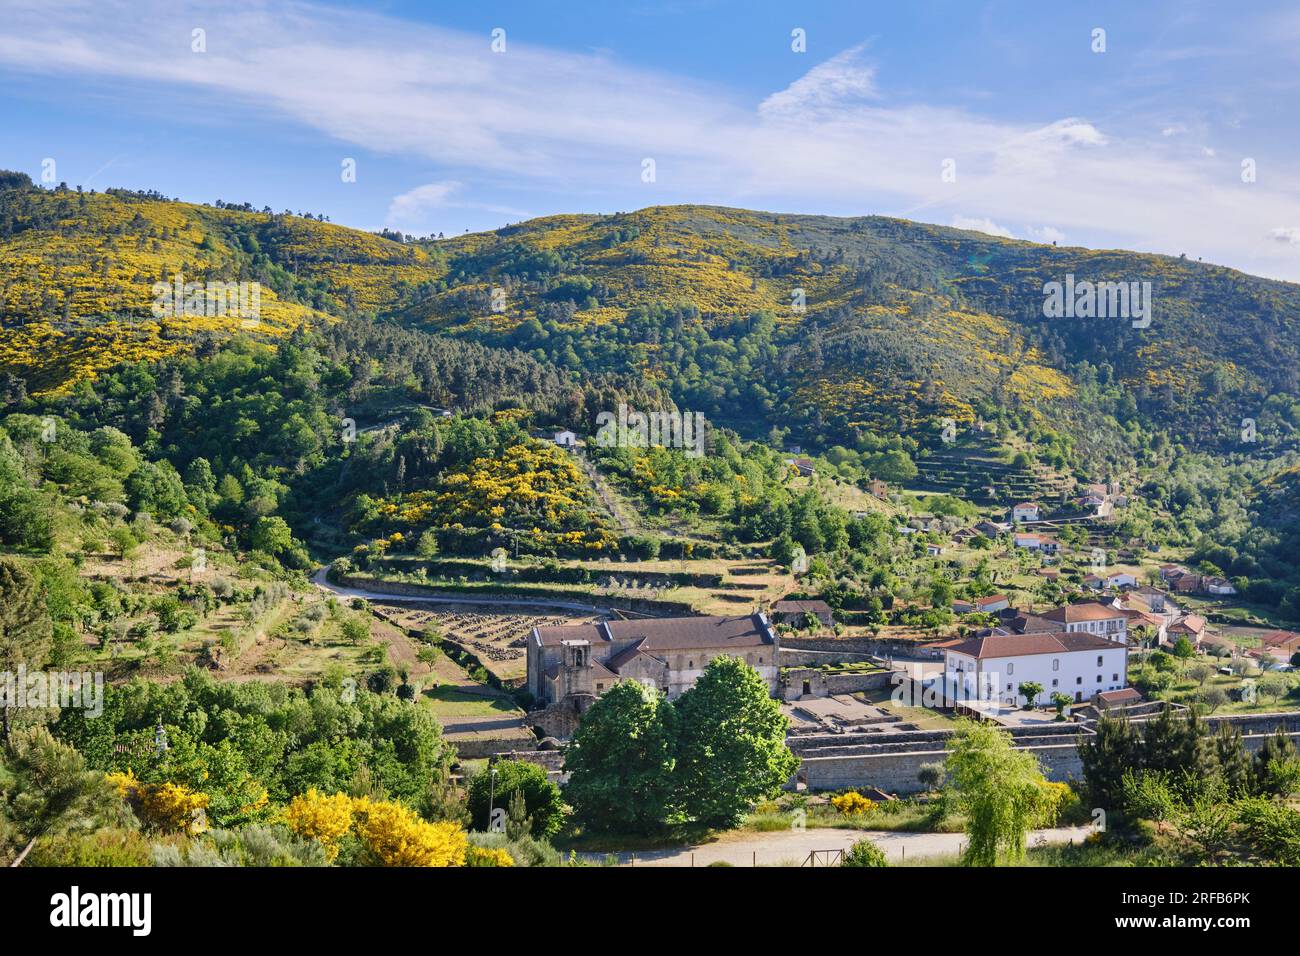 Monastery of Sao Joao de Tarouca and the surrounding mountains coloured in yellow because of the broom in bloom. Tarouca, Portugal Stock Photo